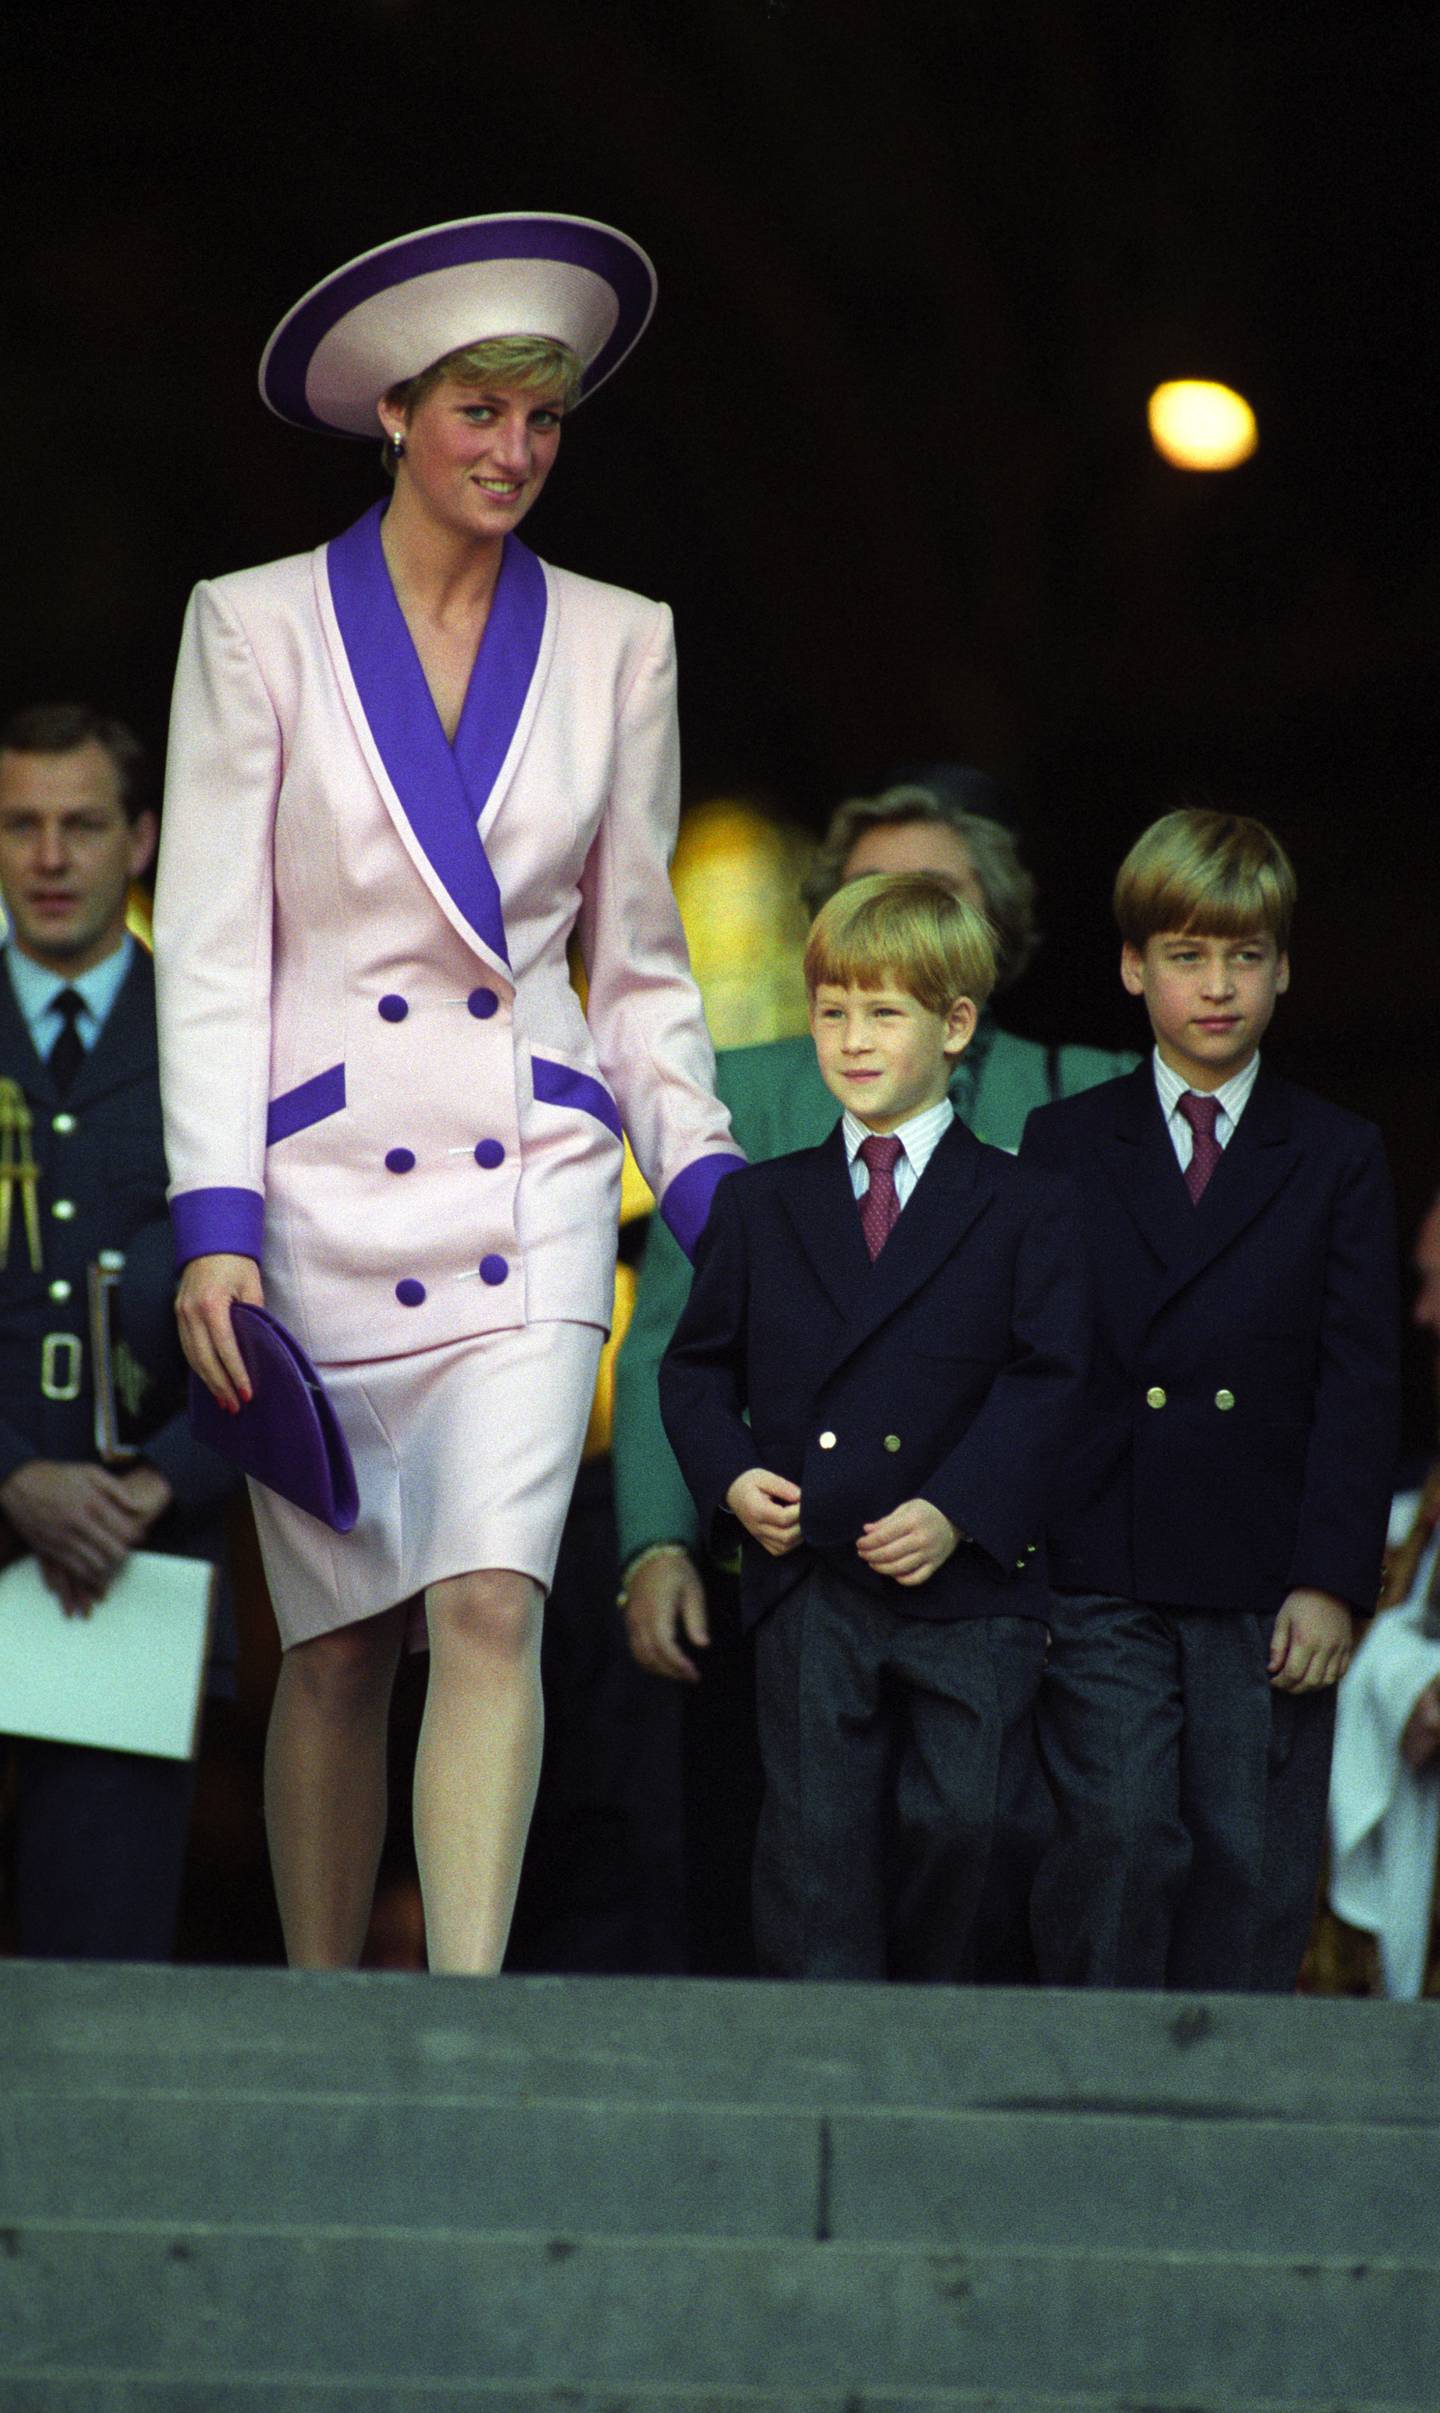 The Princess of Wales with Prince William, right, and Prince Harry, at a service at St Paul's Cathedral in London. PA